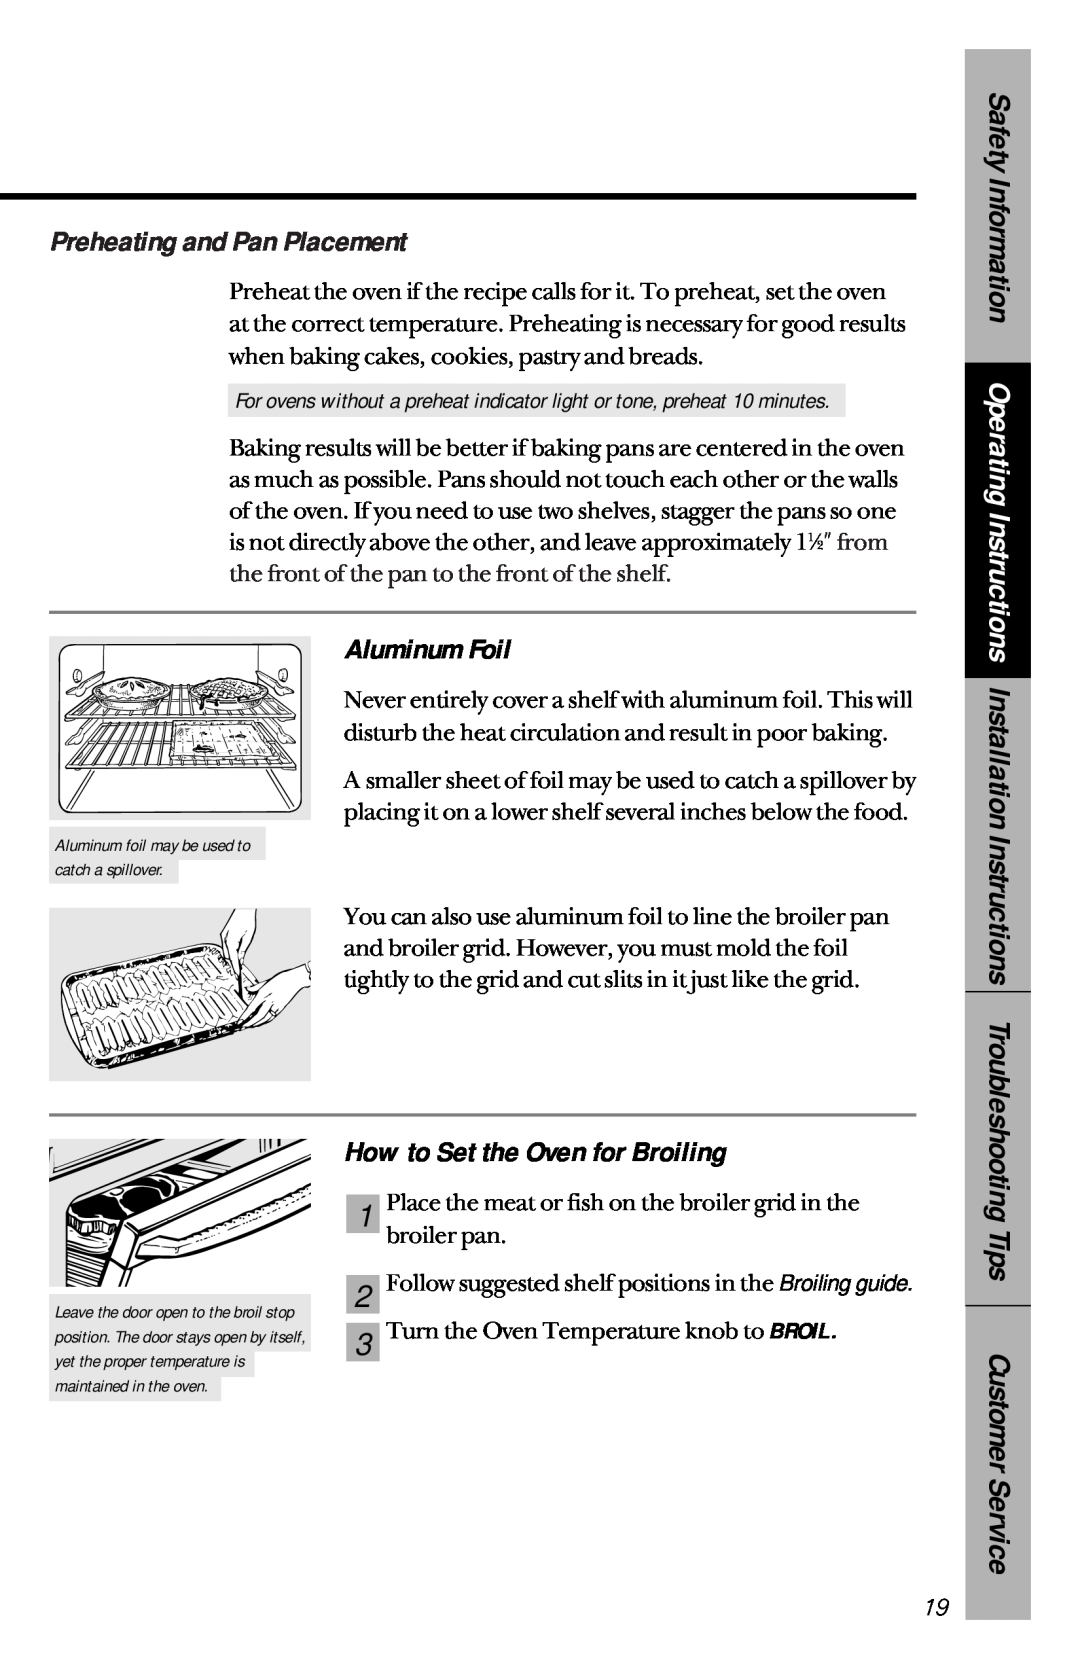 GE 164D3333P150 Preheating and Pan Placement, Aluminum Foil, How to Set the Oven for Broiling, Tips Customer Service 